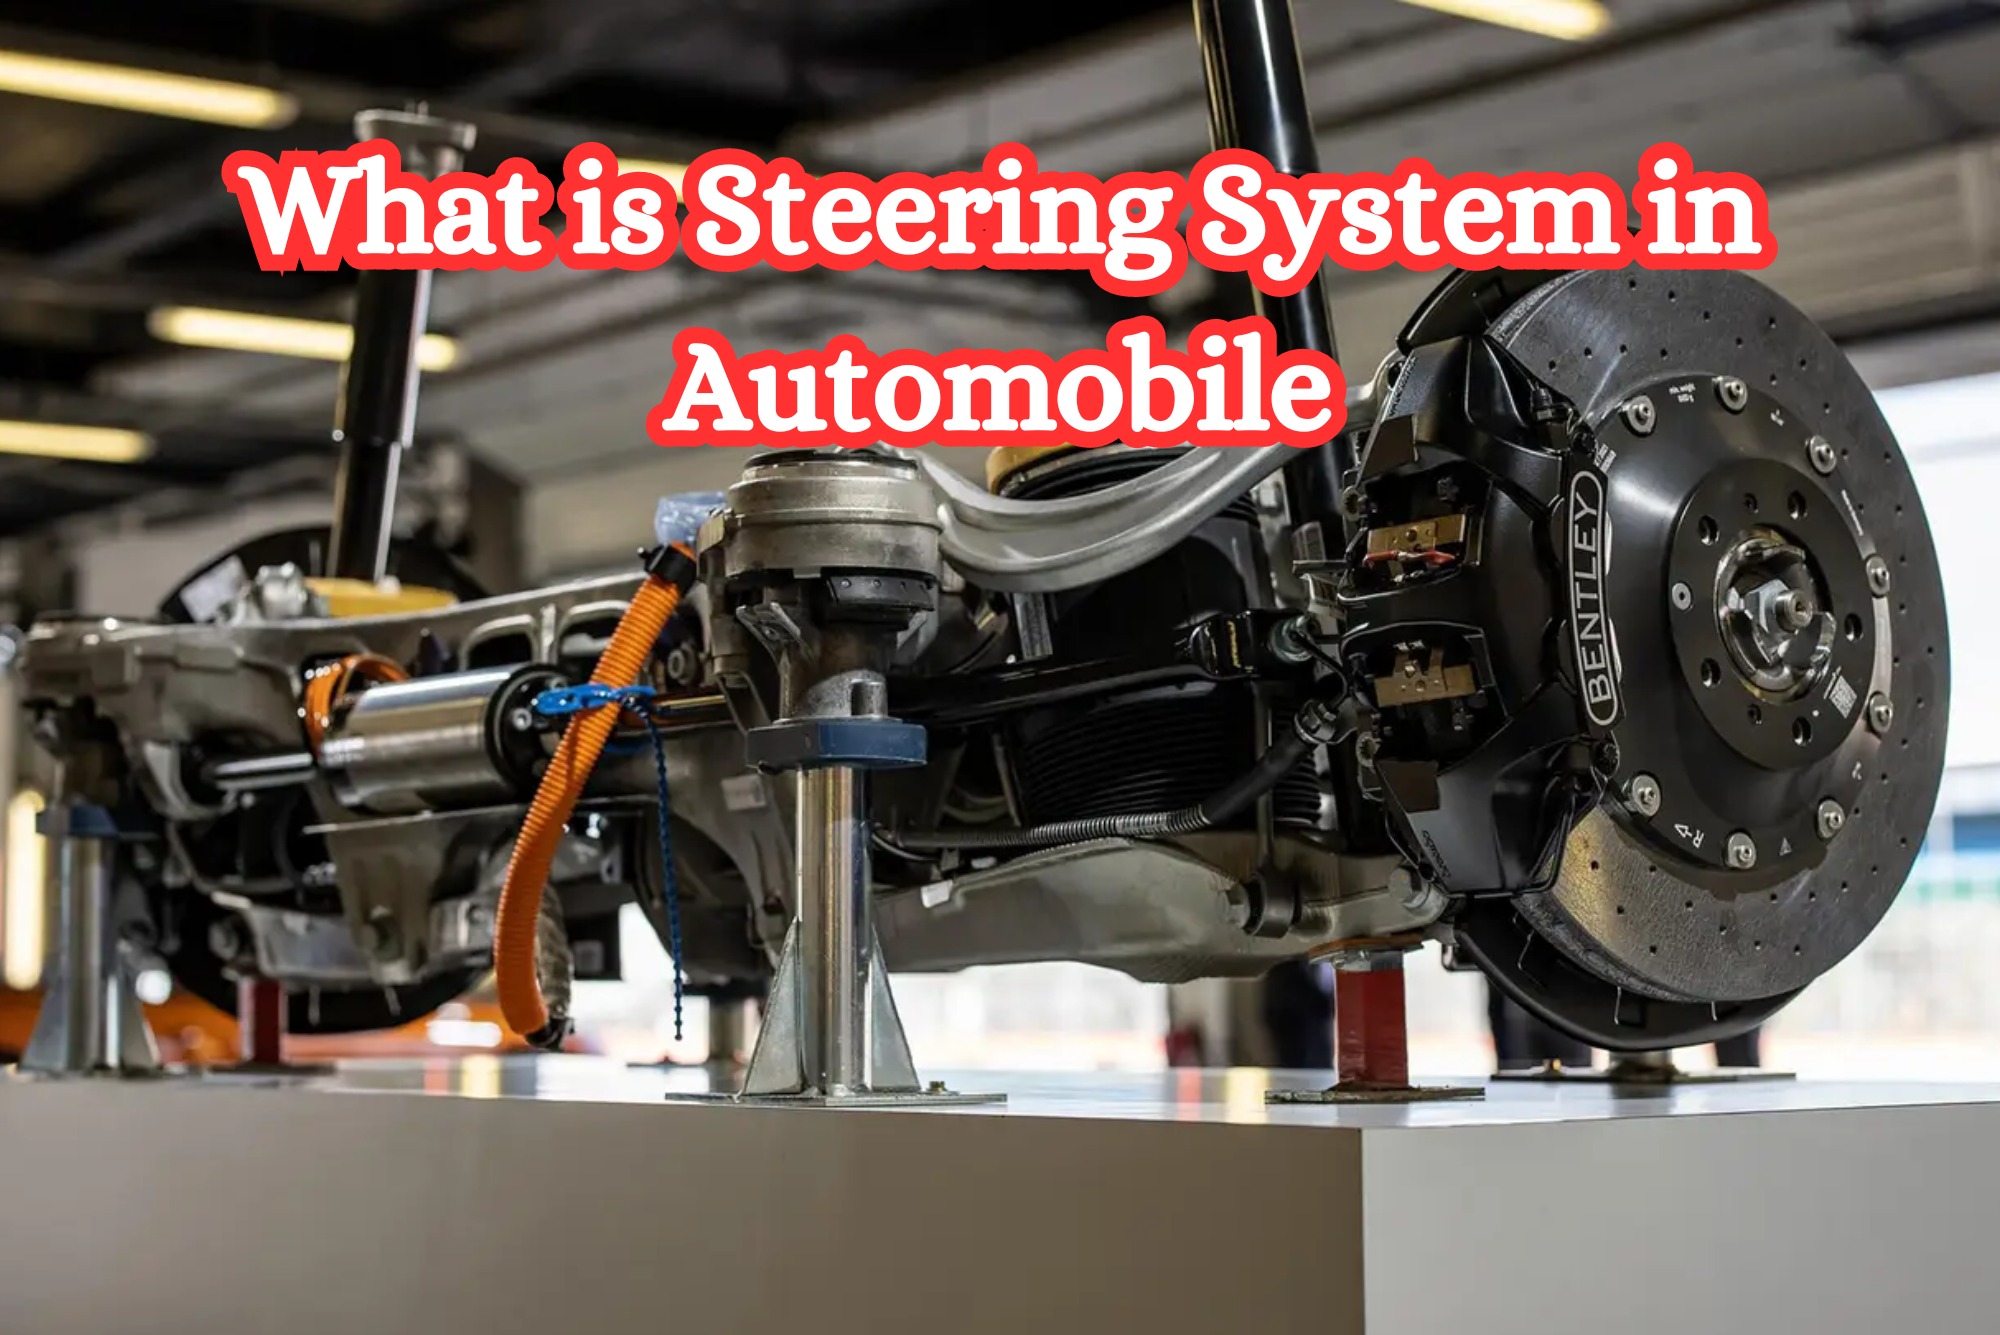 What is Steering System in Automobile